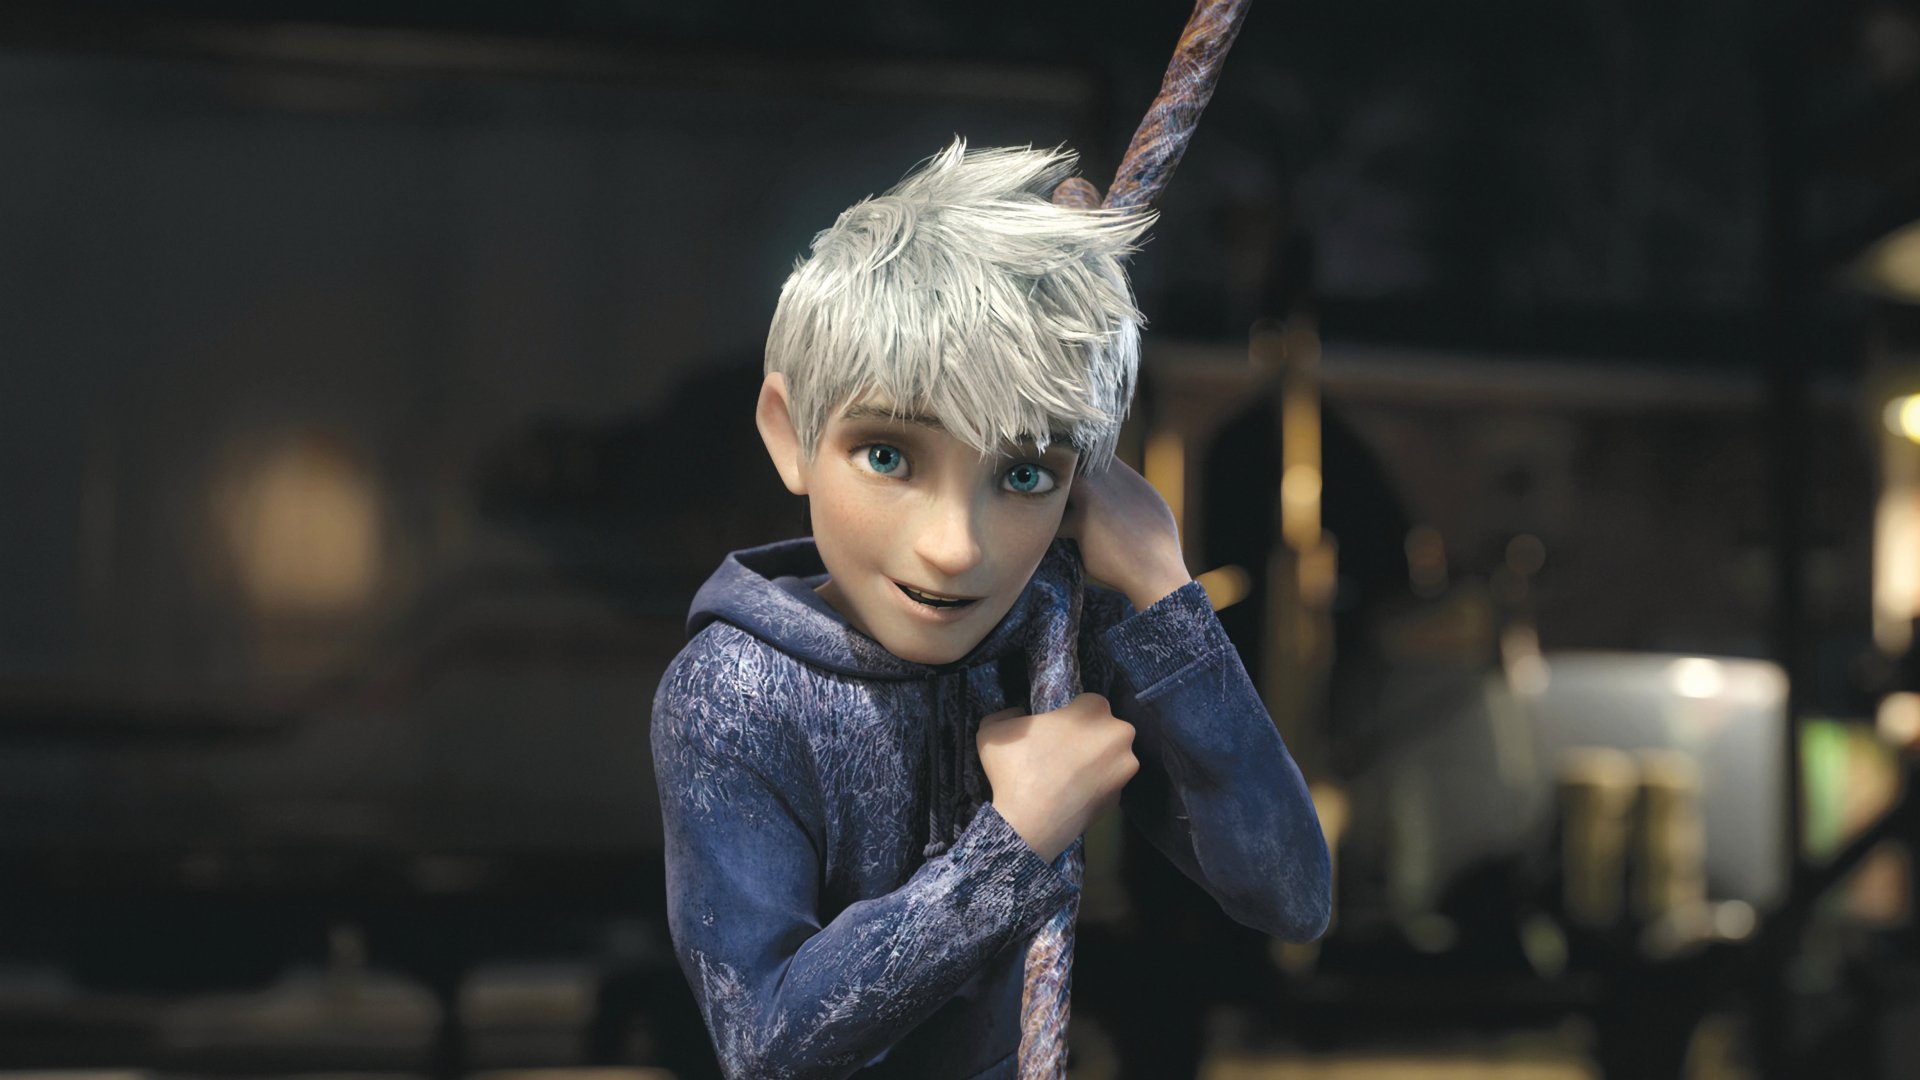 jack frost wallpaper,doll,fashion,hand,blond,photography